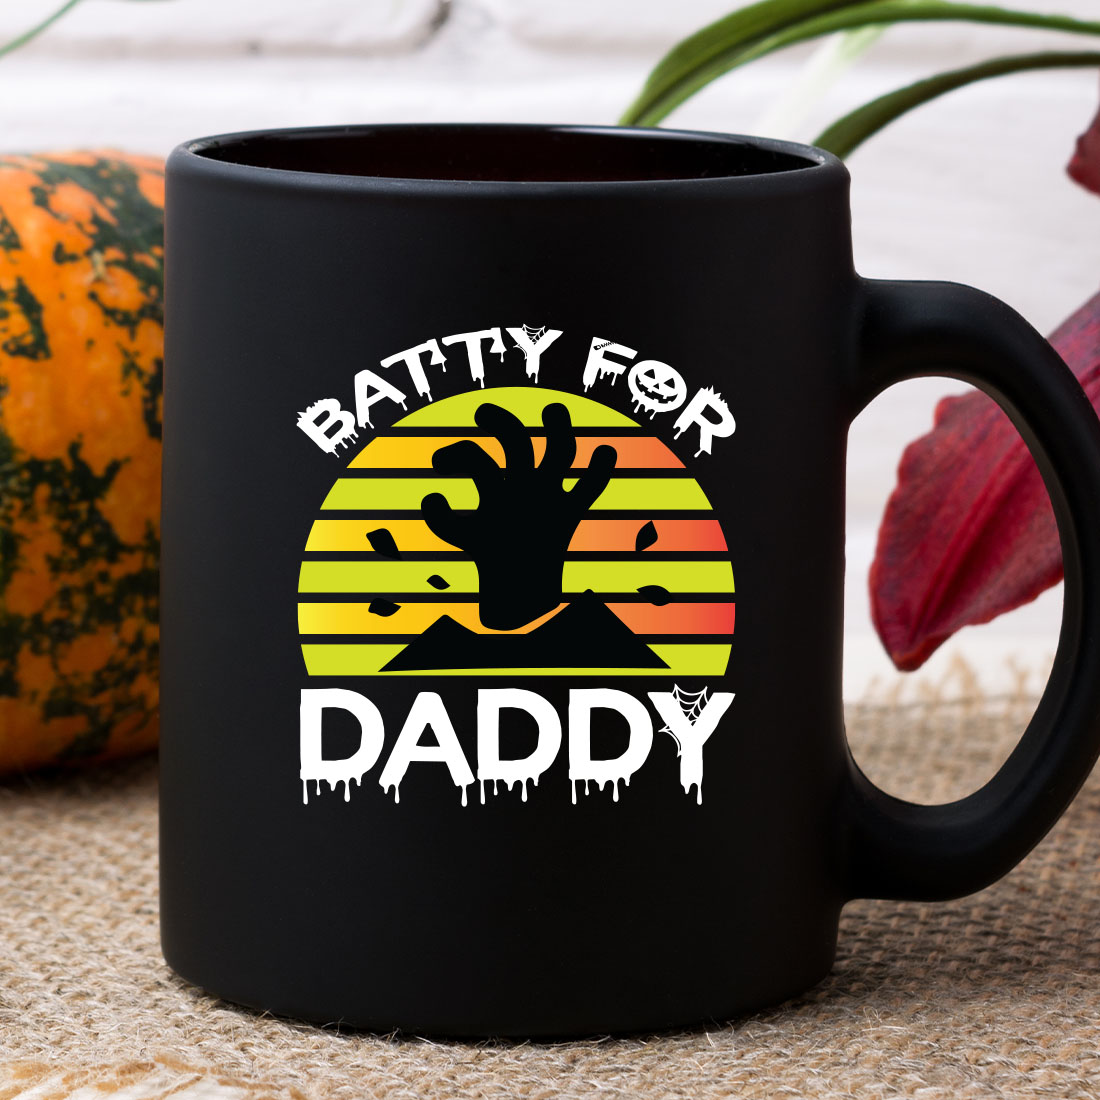 Black coffee mug with the words patty for daddy on it.